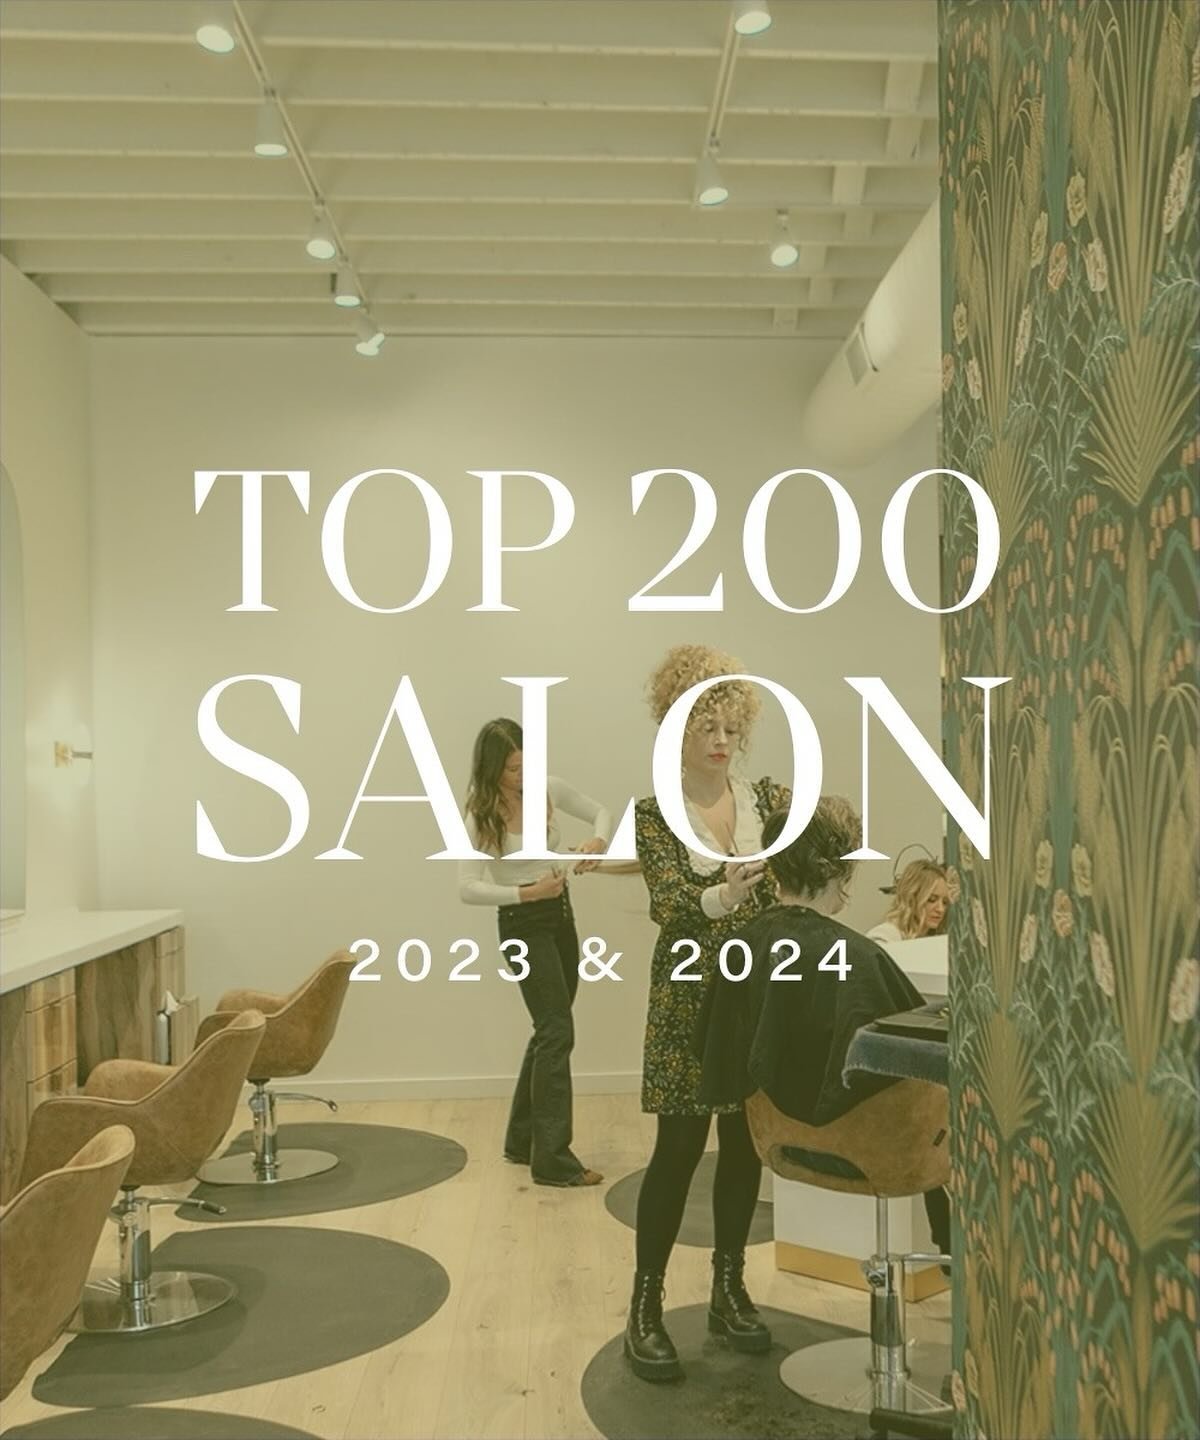 We did it again! We are SO honored to announce that The Mae was recognized as a Top 200 Salon for the second year in a row. This year, we grew by 31%, and we are so grateful for every teammate and every client that makes The Mae what it is. We adore 